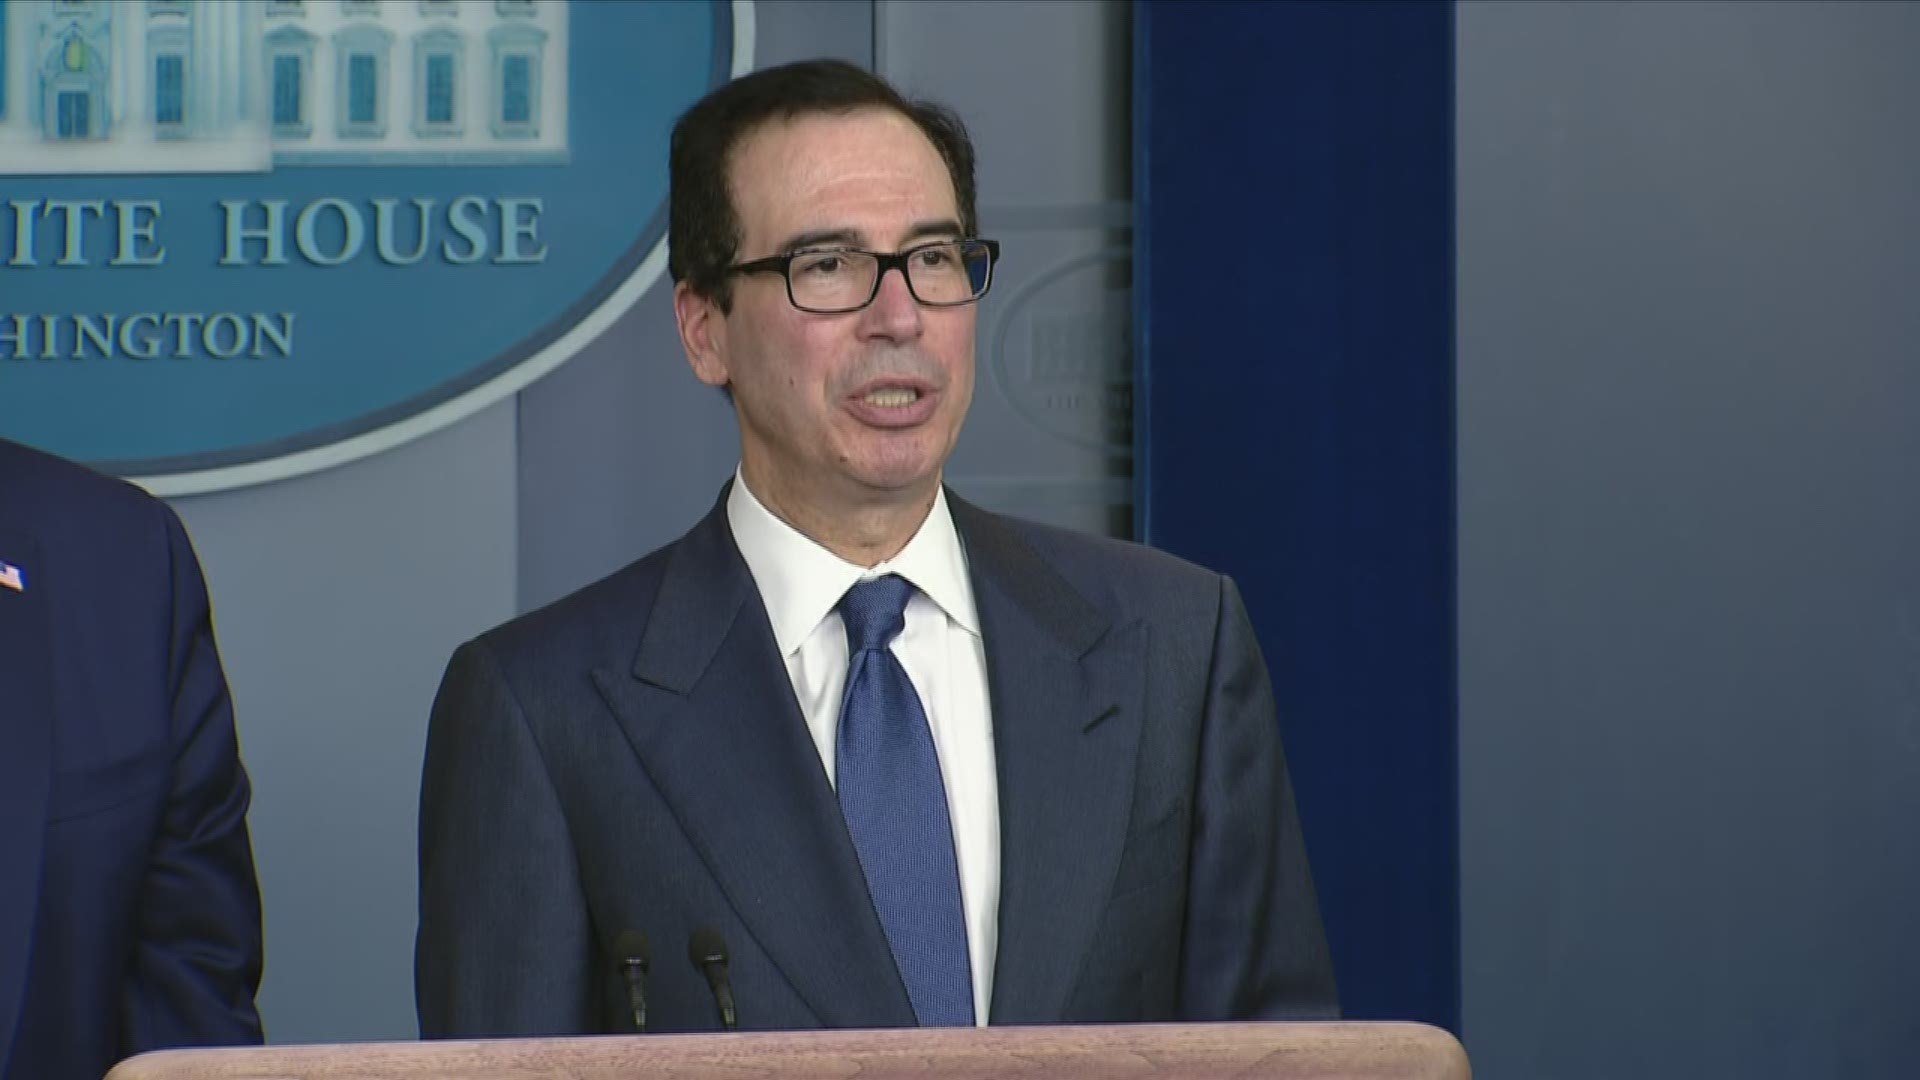 U.S. Treasury Secretary Steven Mnuchin said Wednesday that he expects direct payments to taxpayers from the $2 trillion aid package to start in three weeks.